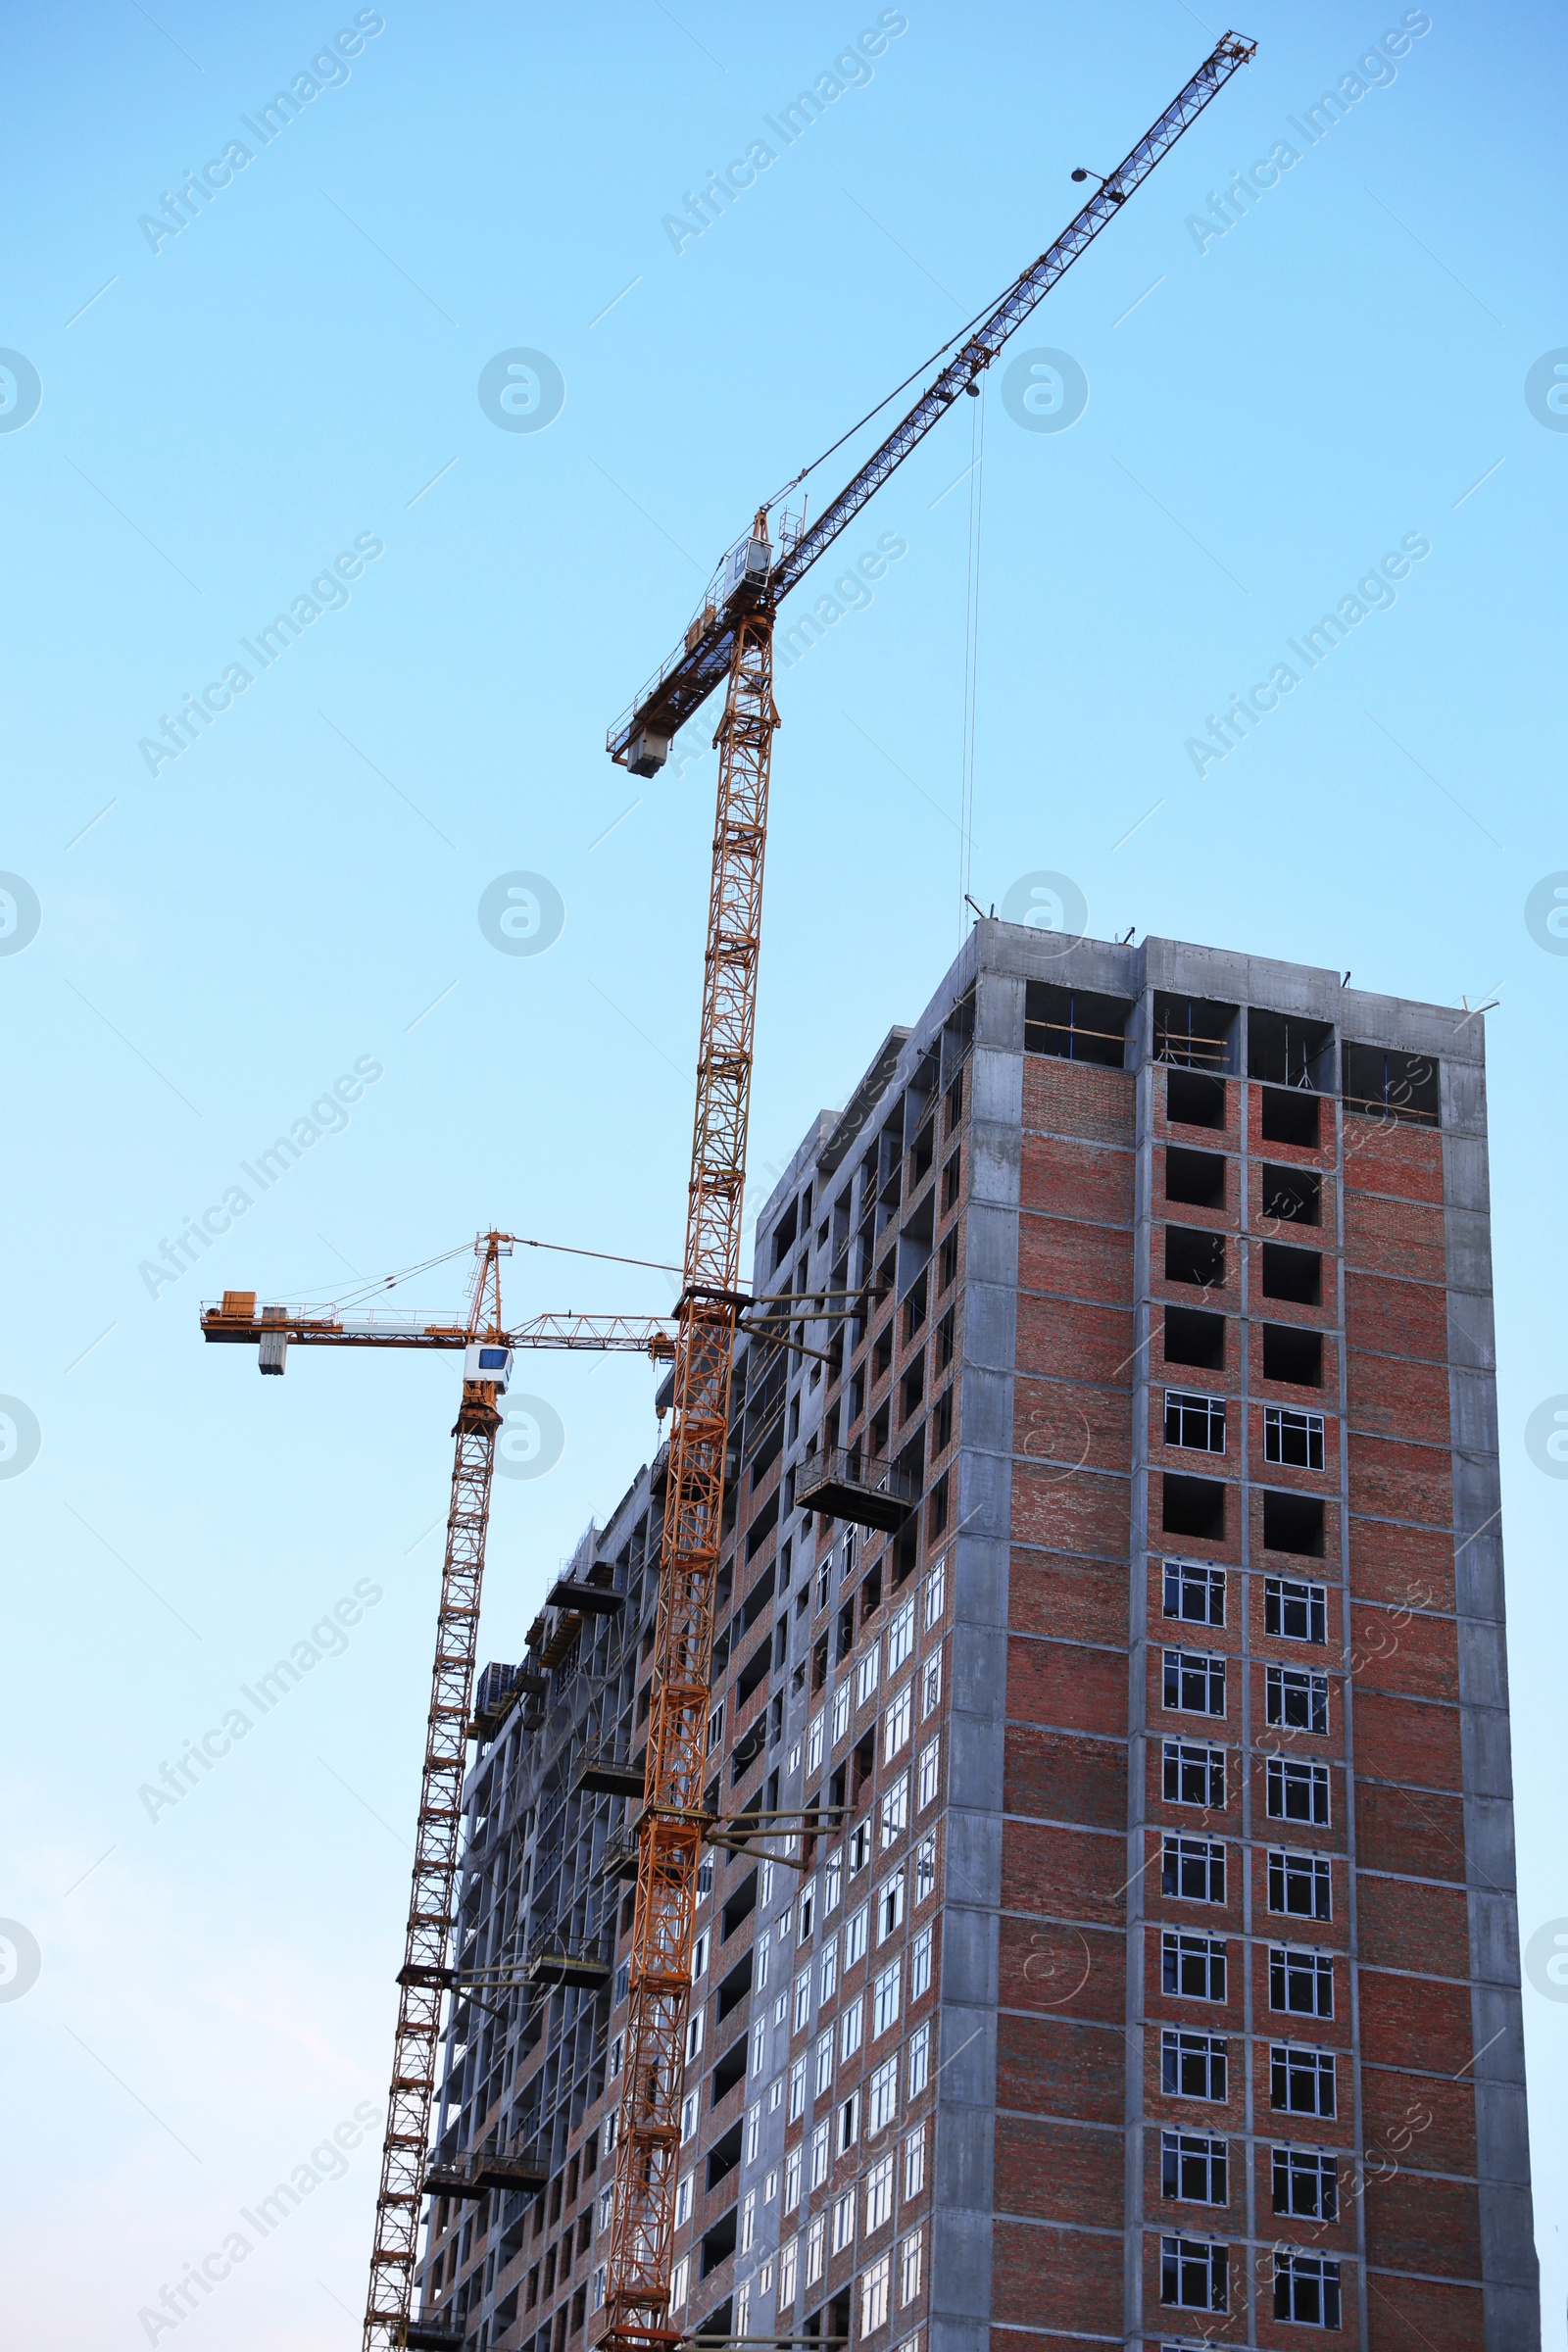 Photo of Construction crane and unfinished building against blue sky